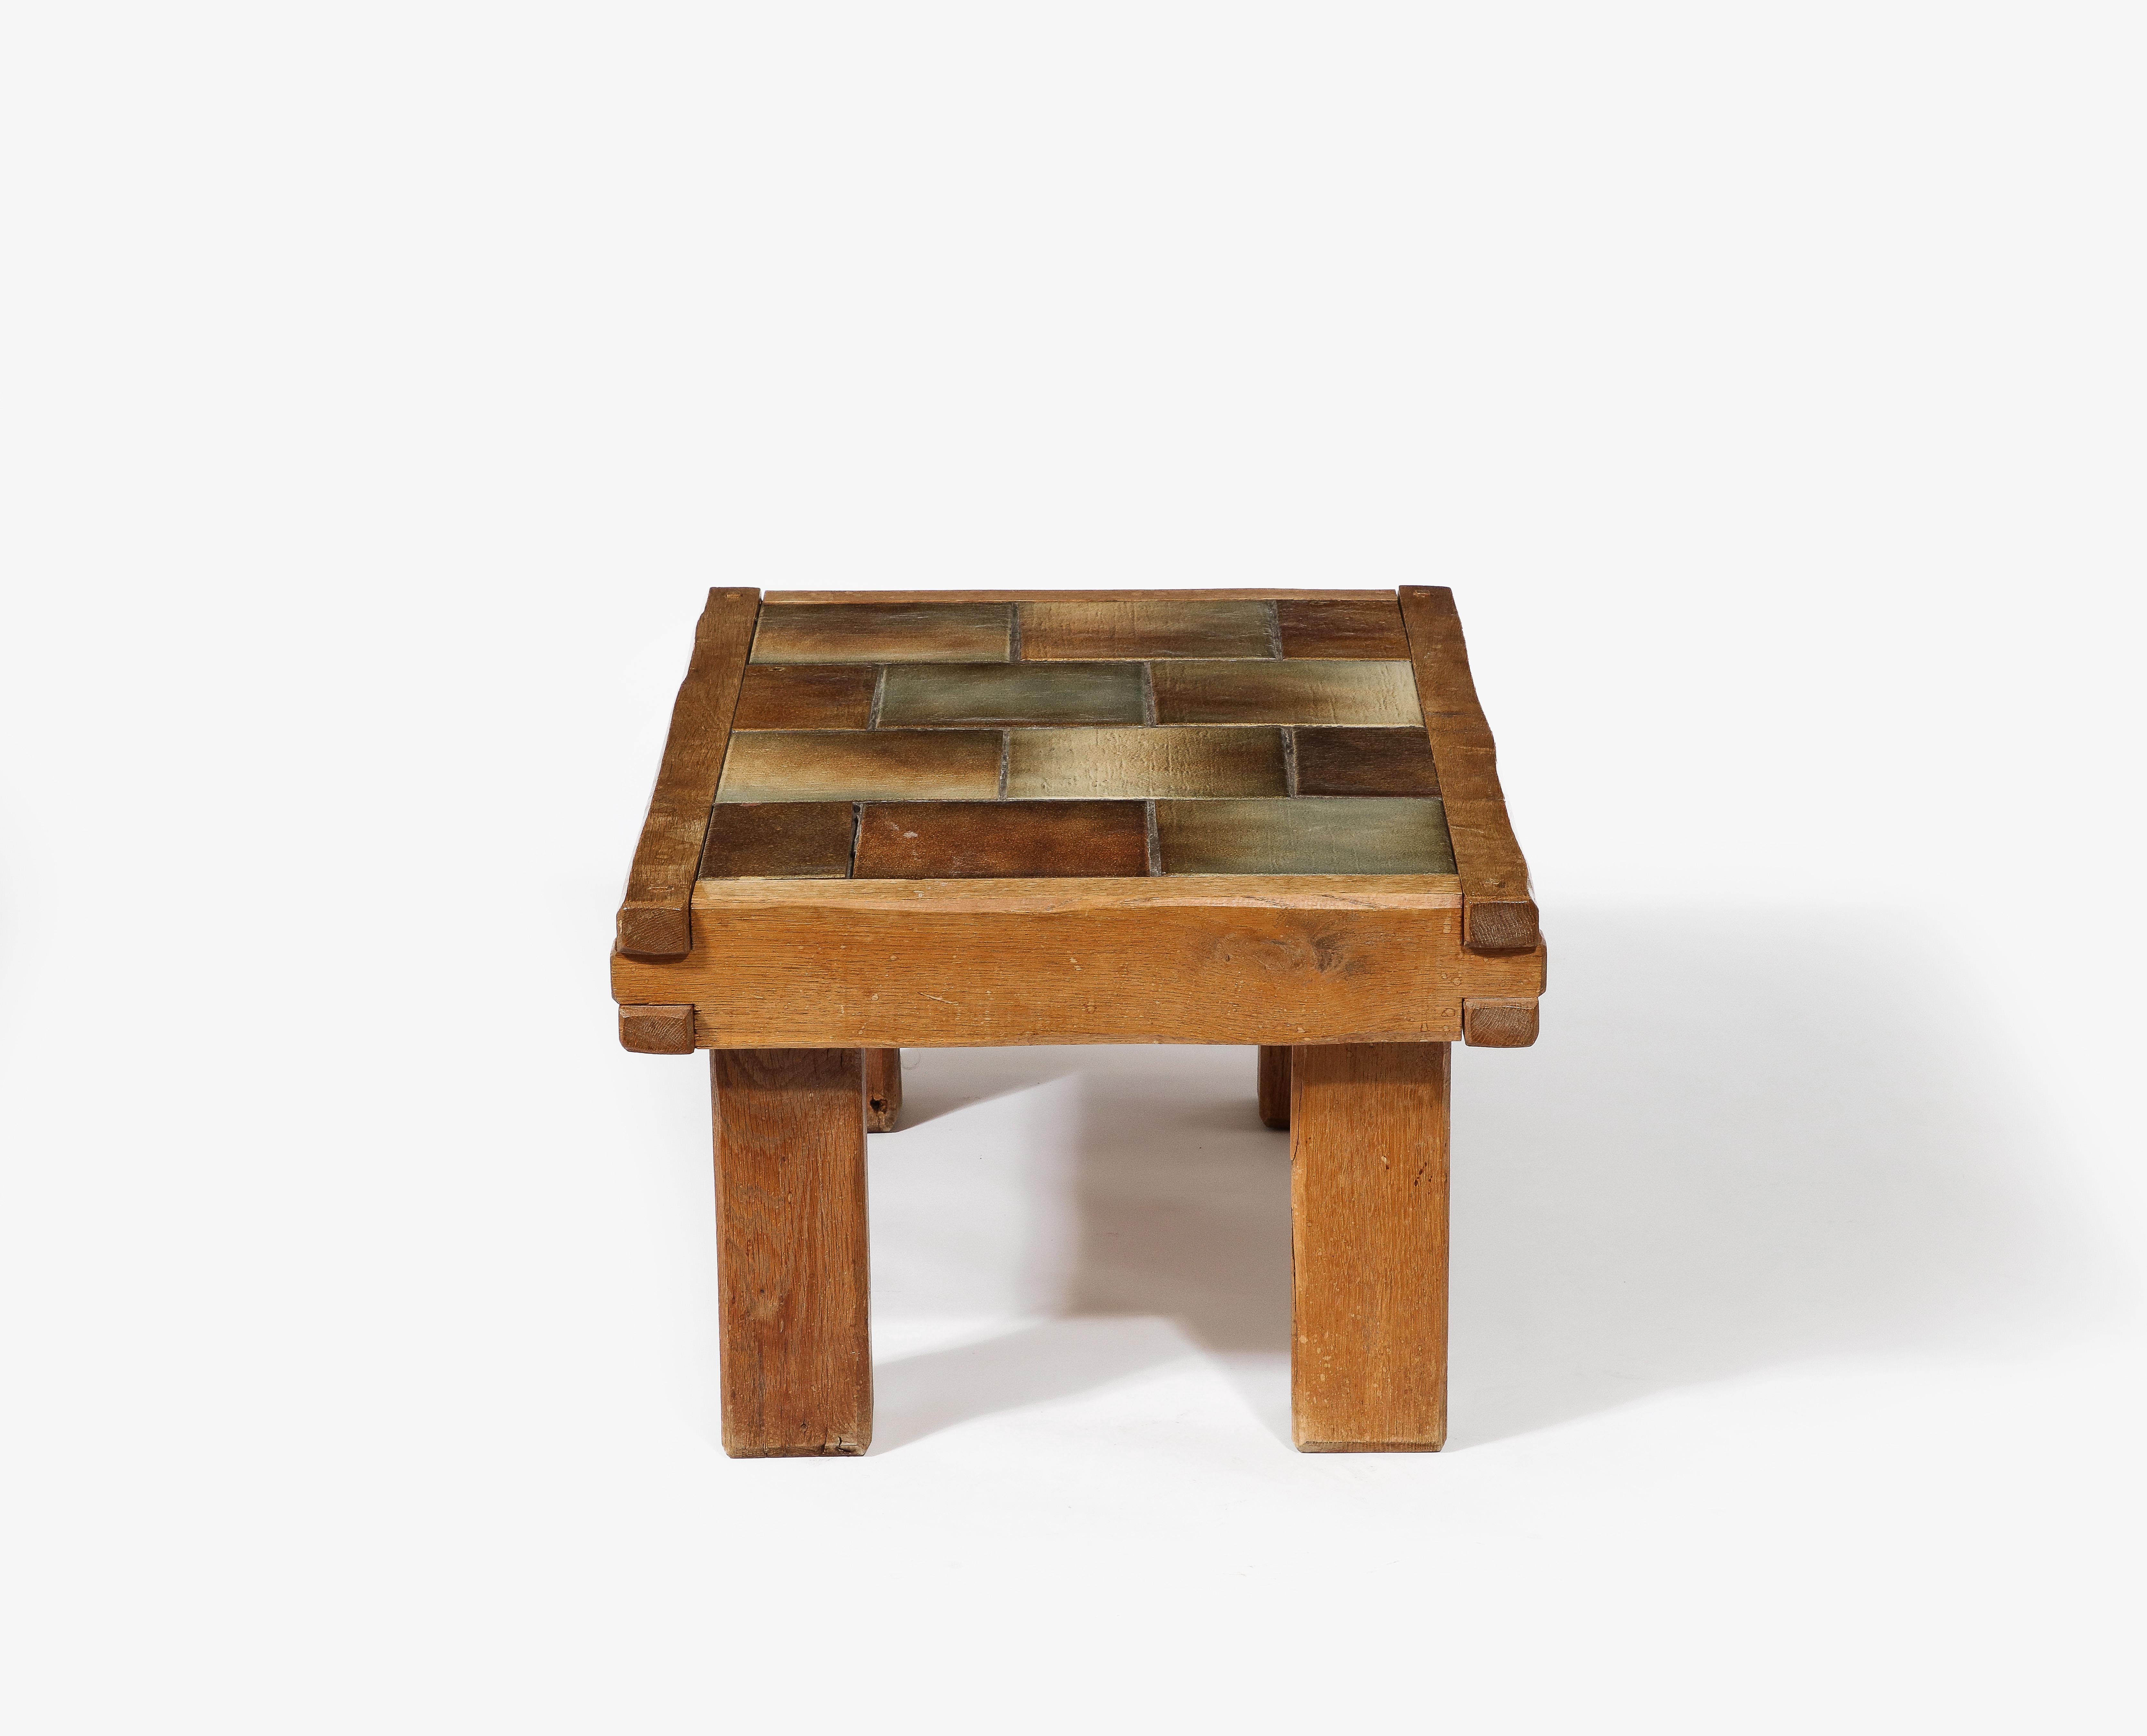 Small Brutalist Coffee Table with Ceramic Tile Top & Oak, France 1960's For Sale 1